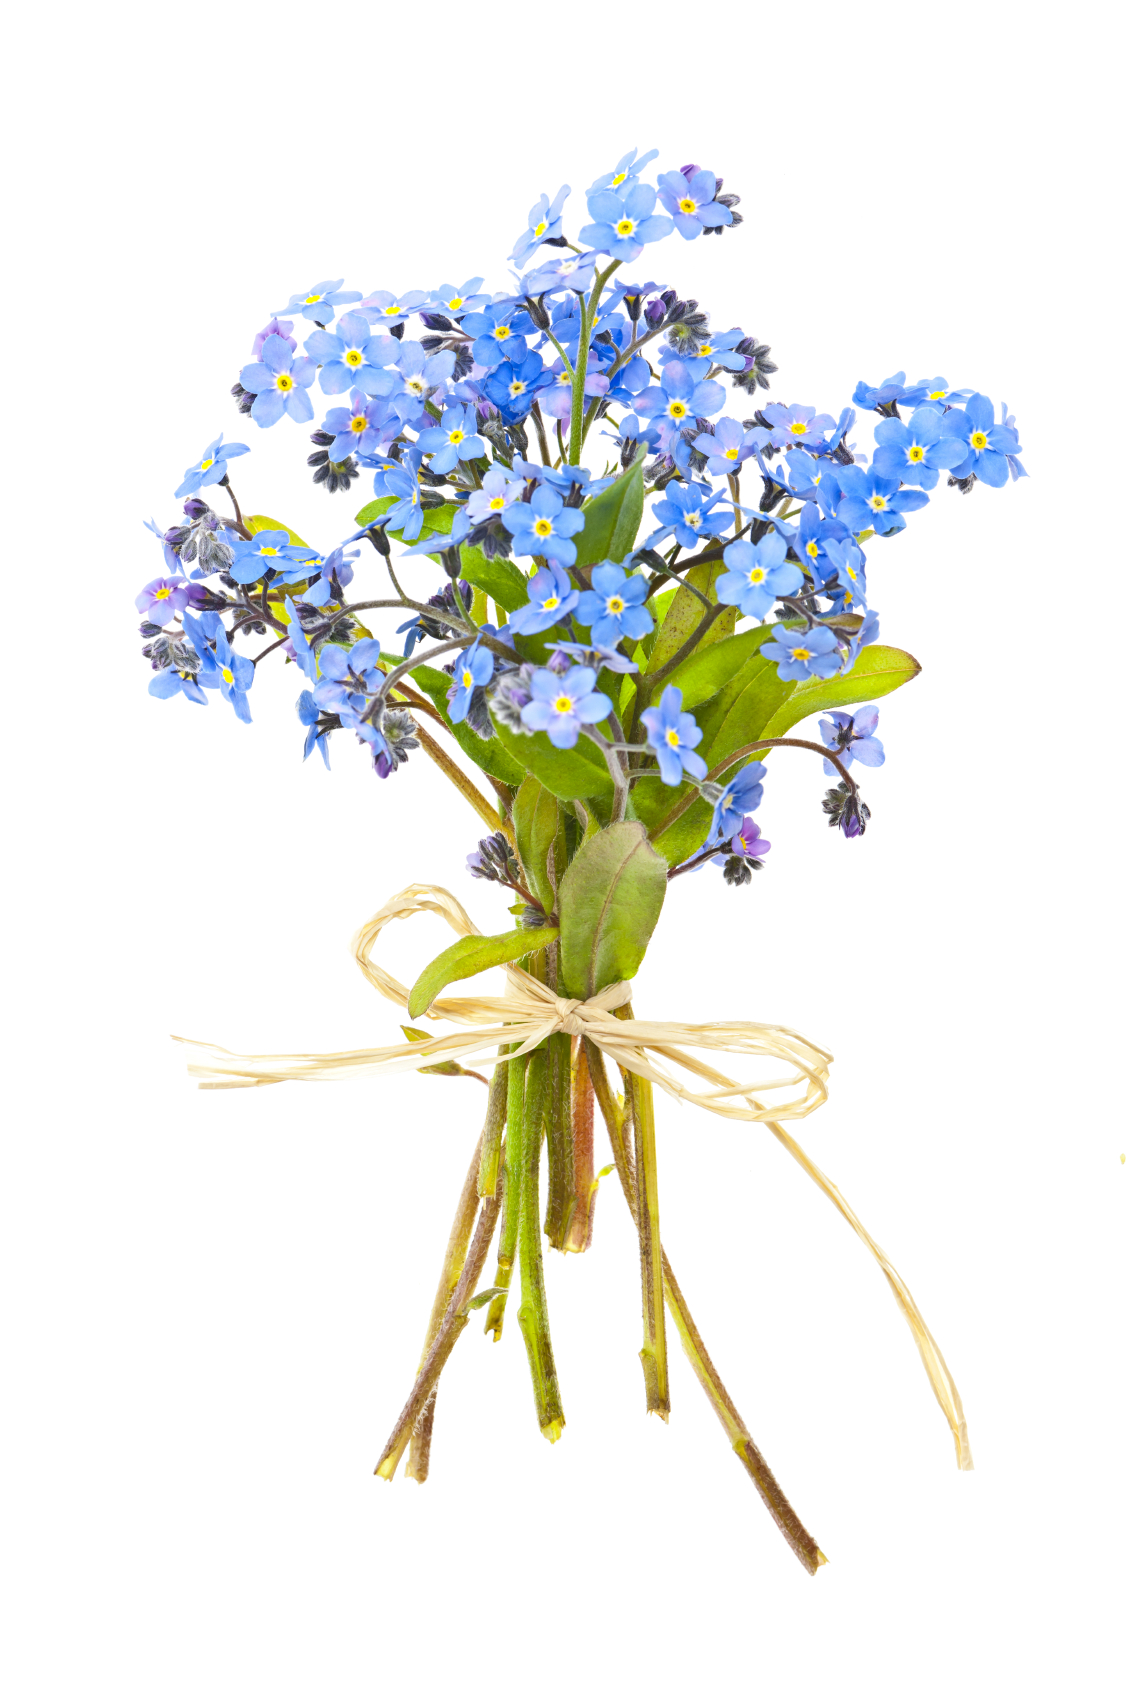 forget-me-not flowers